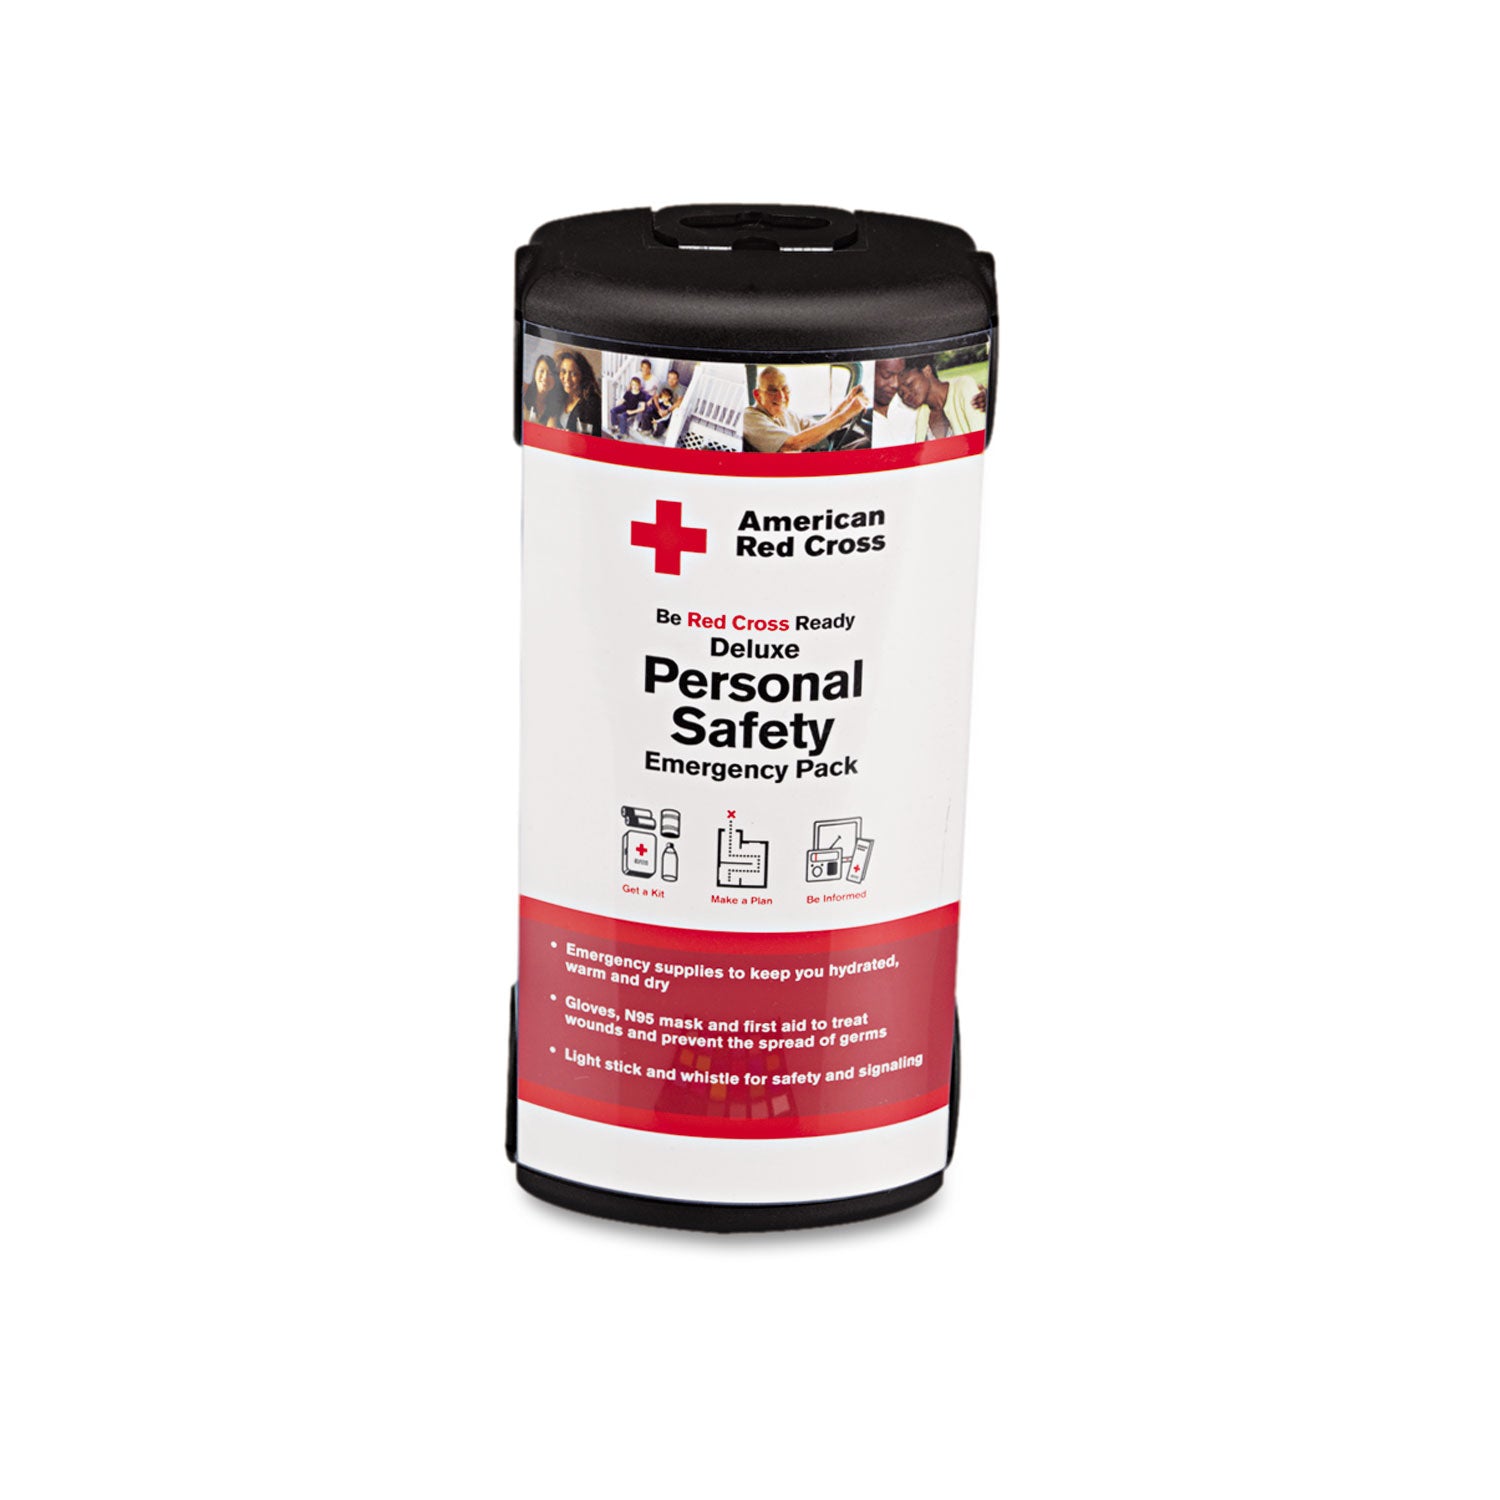 Deluxe Personal Safety Emergency Pack, 31 Pieces, 3.88 x 2.88 x 8.25 - 